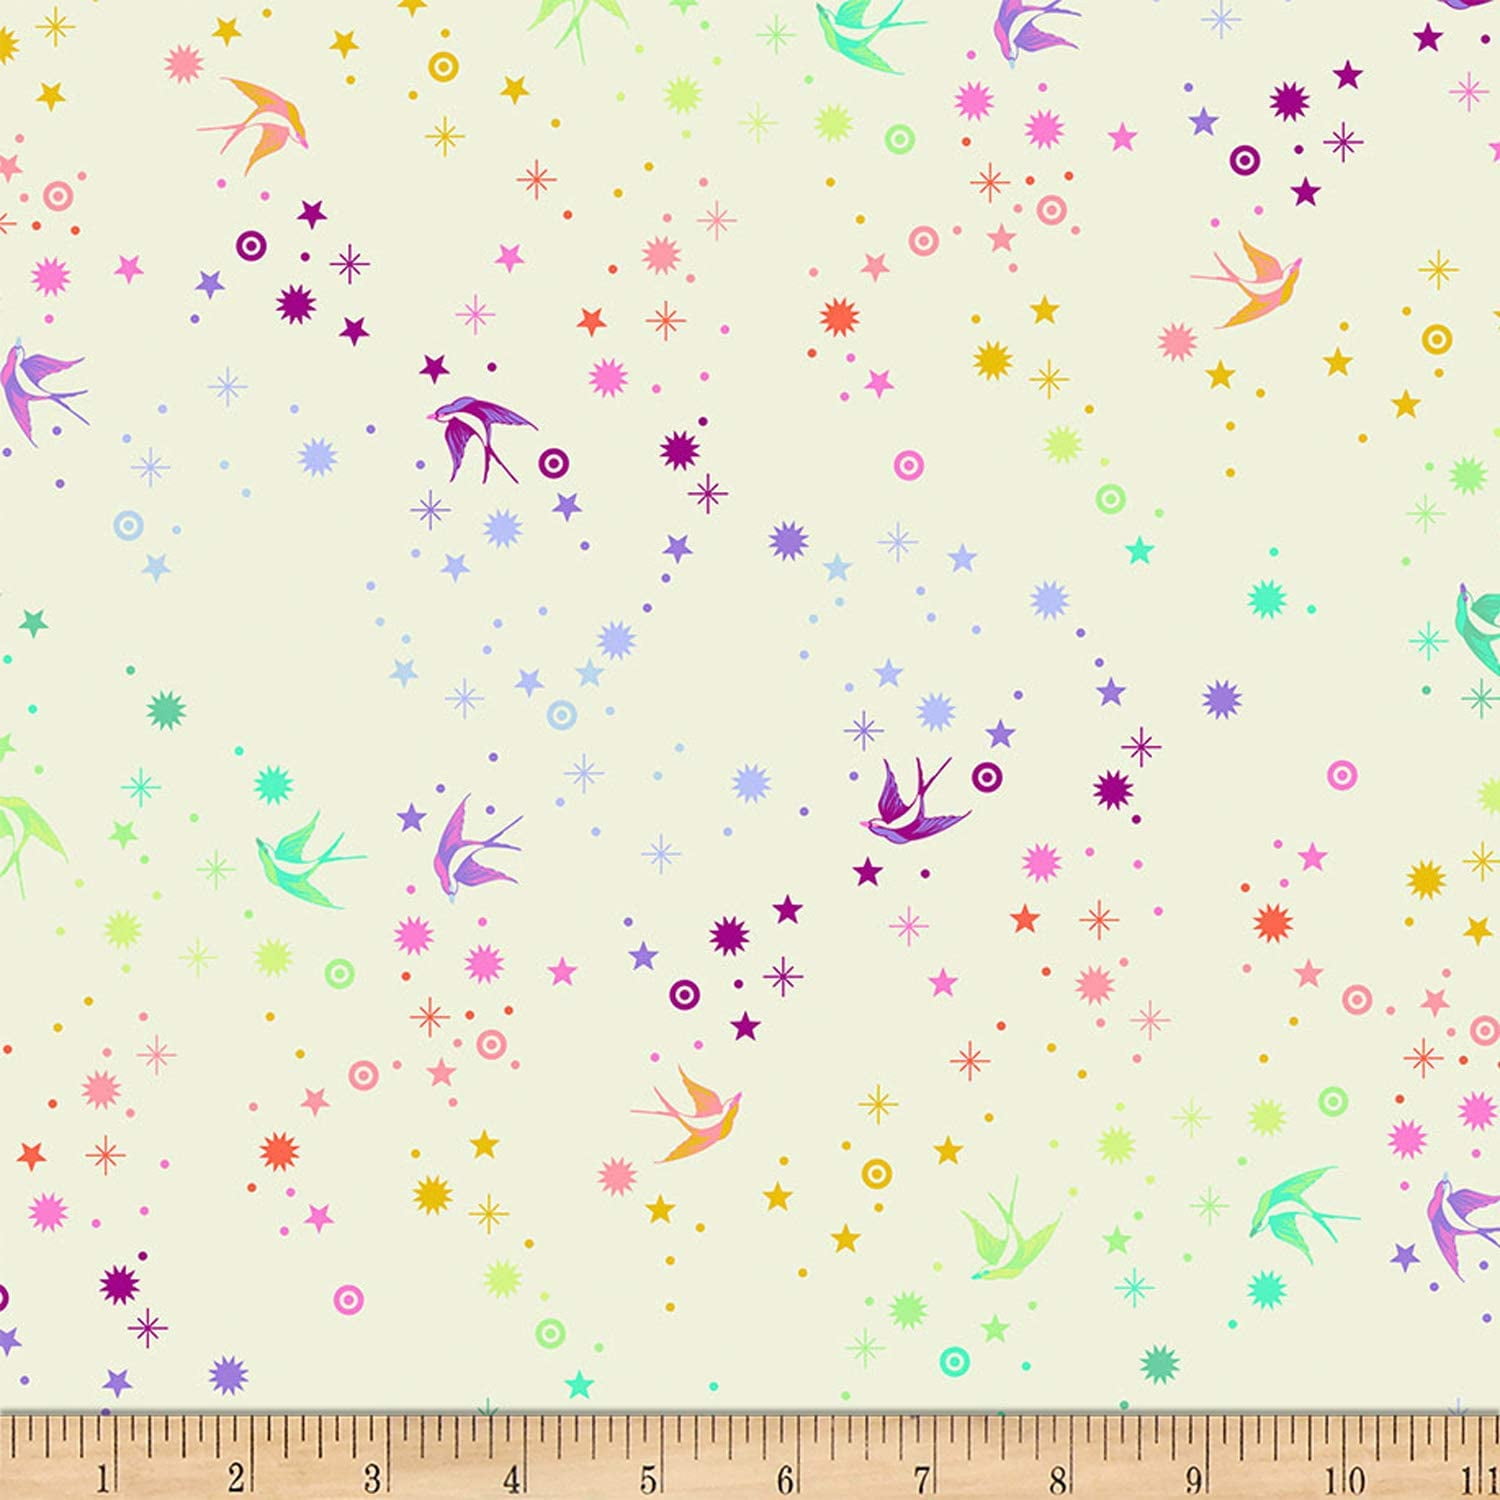 Free Spirit Tula Pink Fabric ~ Pinkerville Fairy Dust Day Dream ~By The yard 